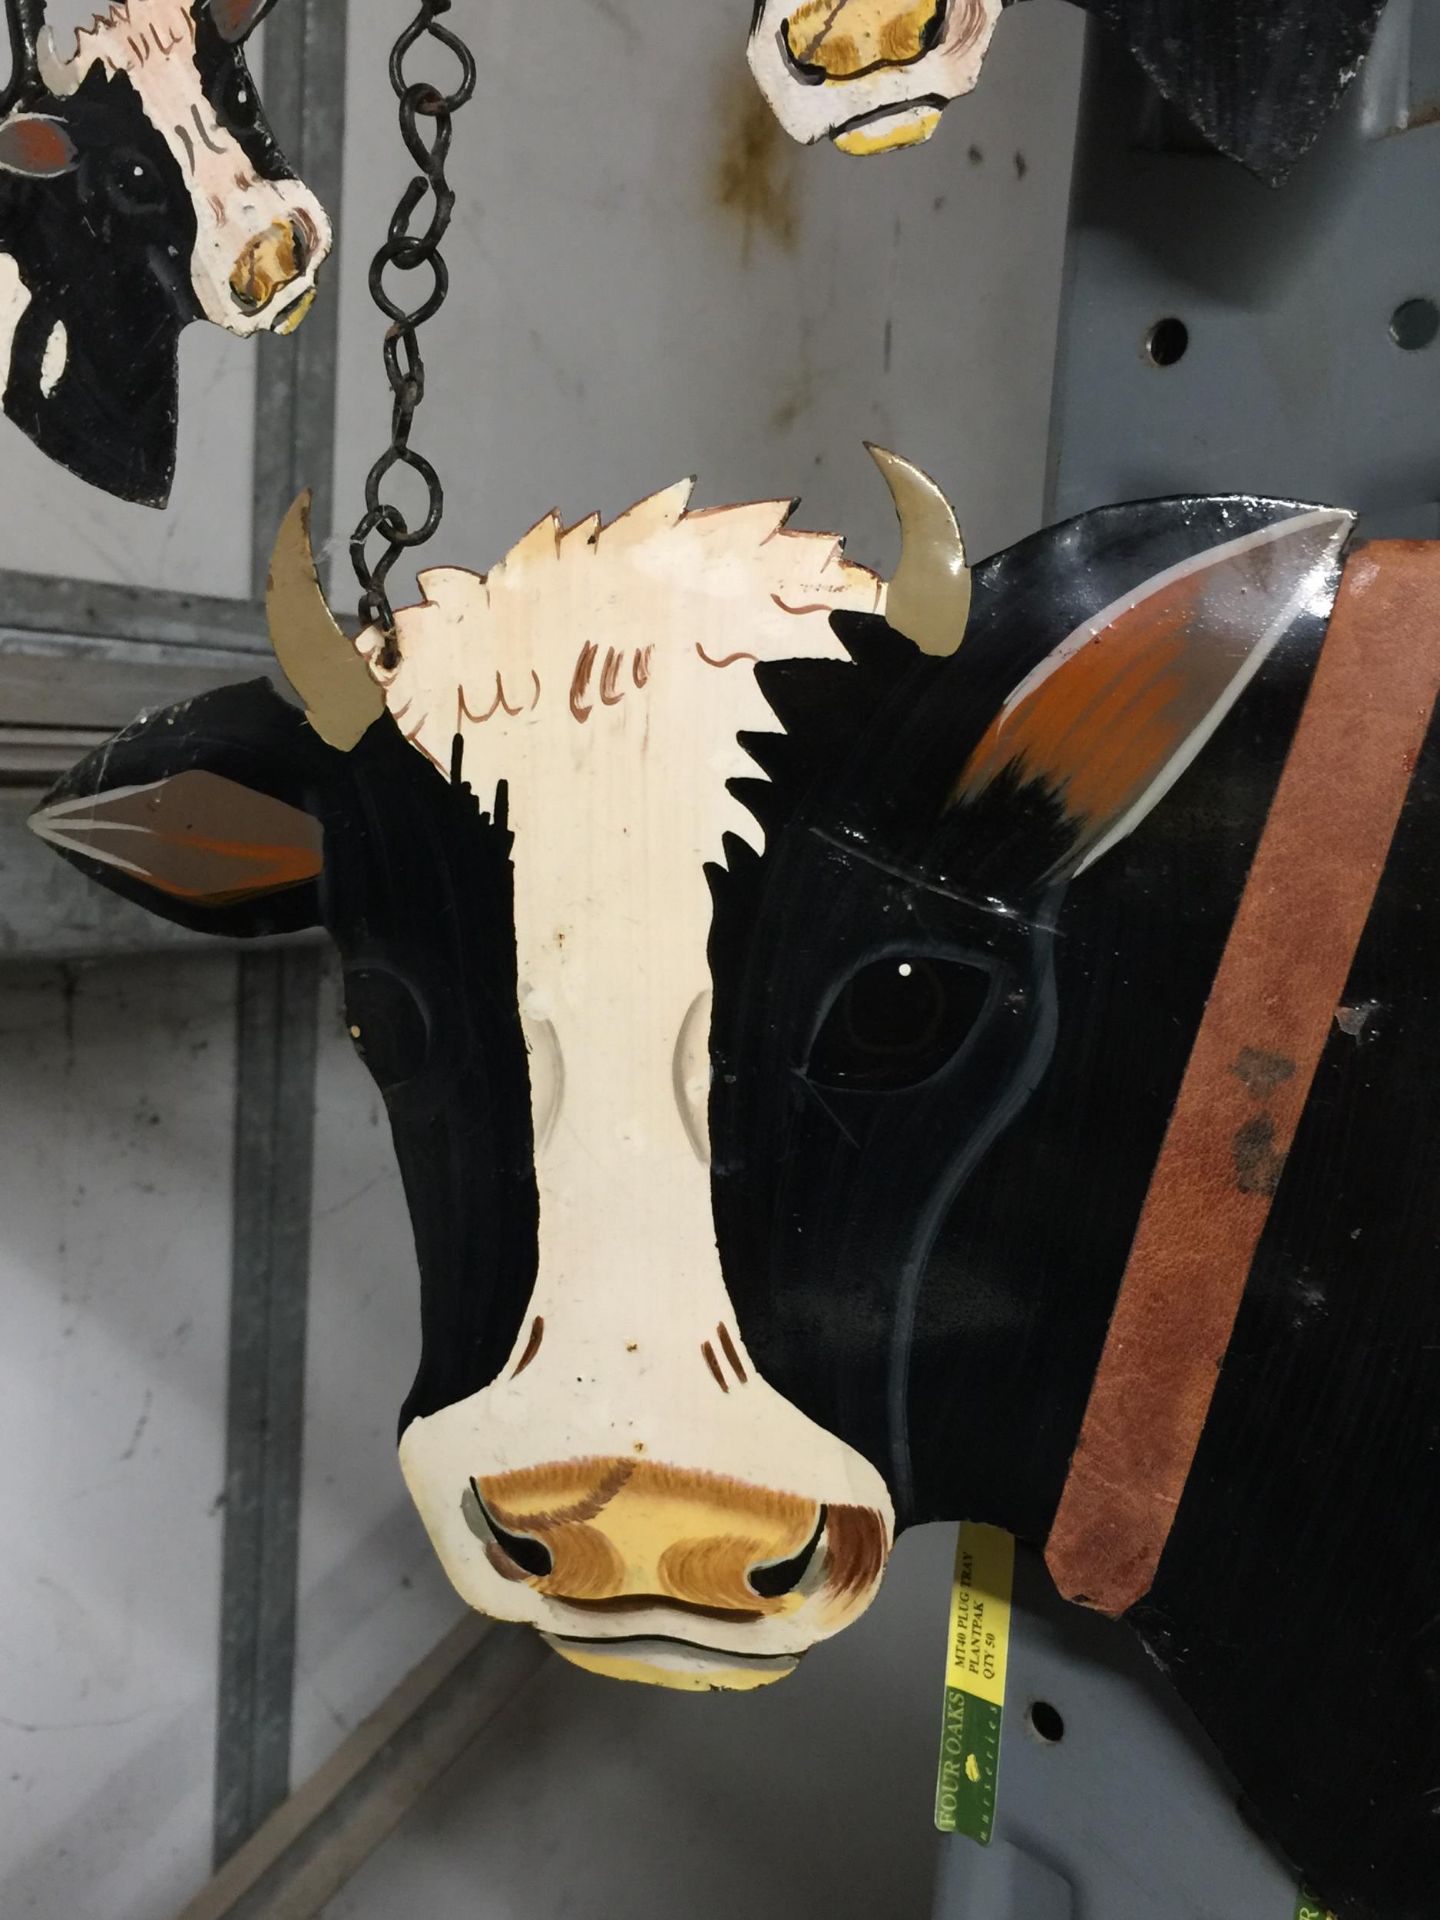 A METAL COW DESIGN HANGING WELCOME SIGN - Image 2 of 2